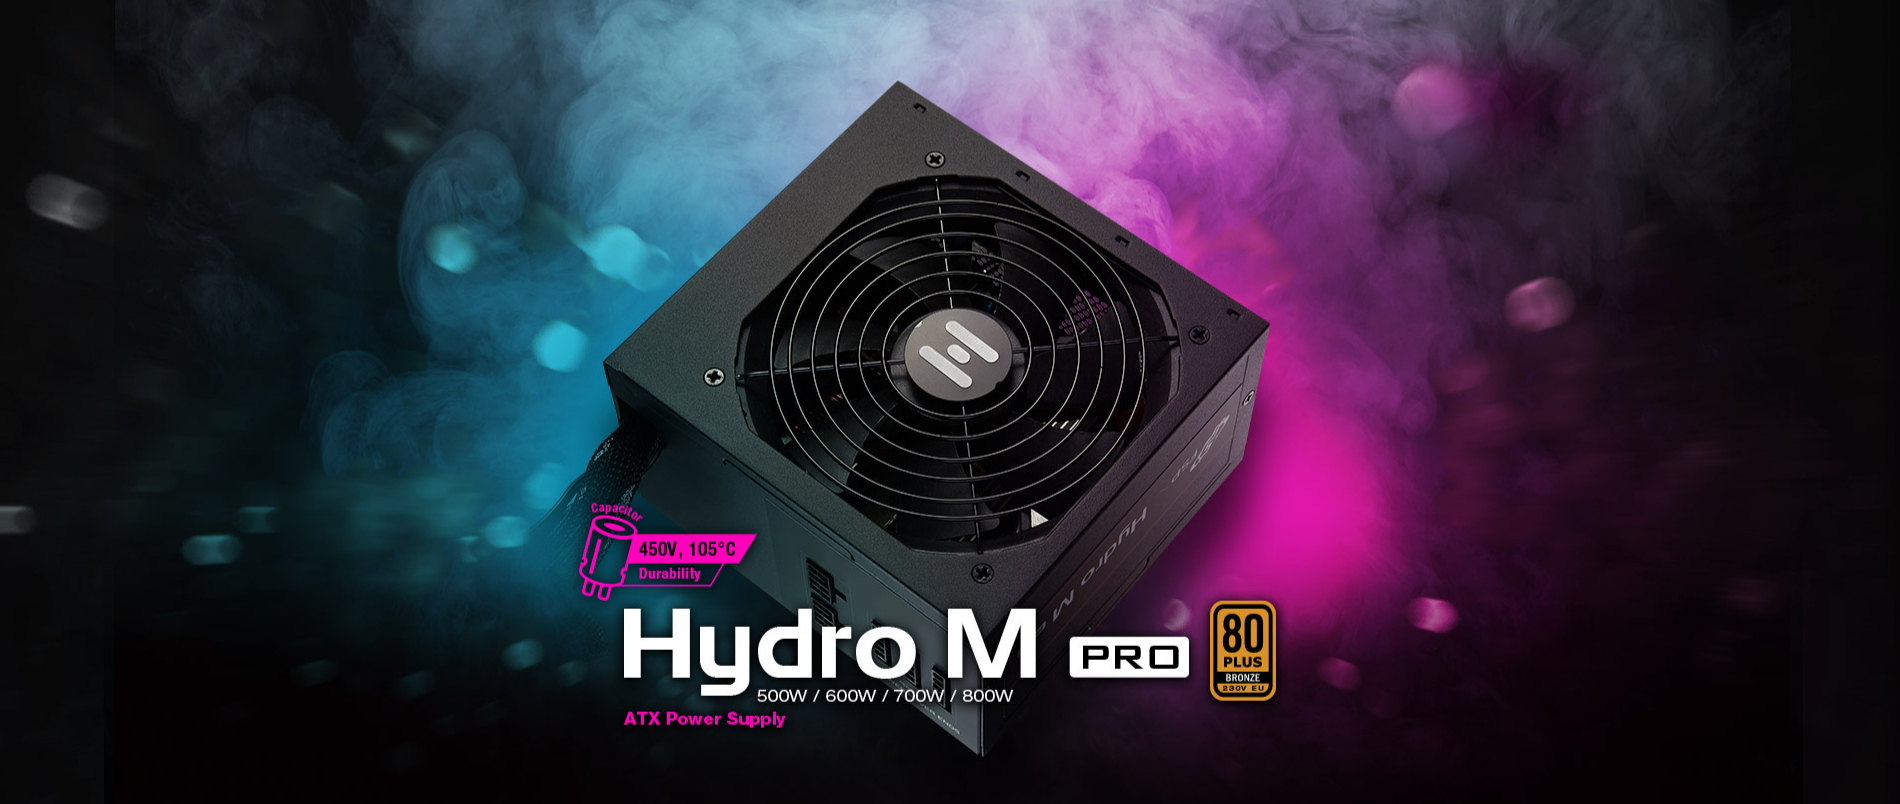 A large marketing image providing additional information about the product FSP Hydro M PRO 800W Bronze PCIe 5.0 ATX Semi-Modular PSU - Additional alt info not provided